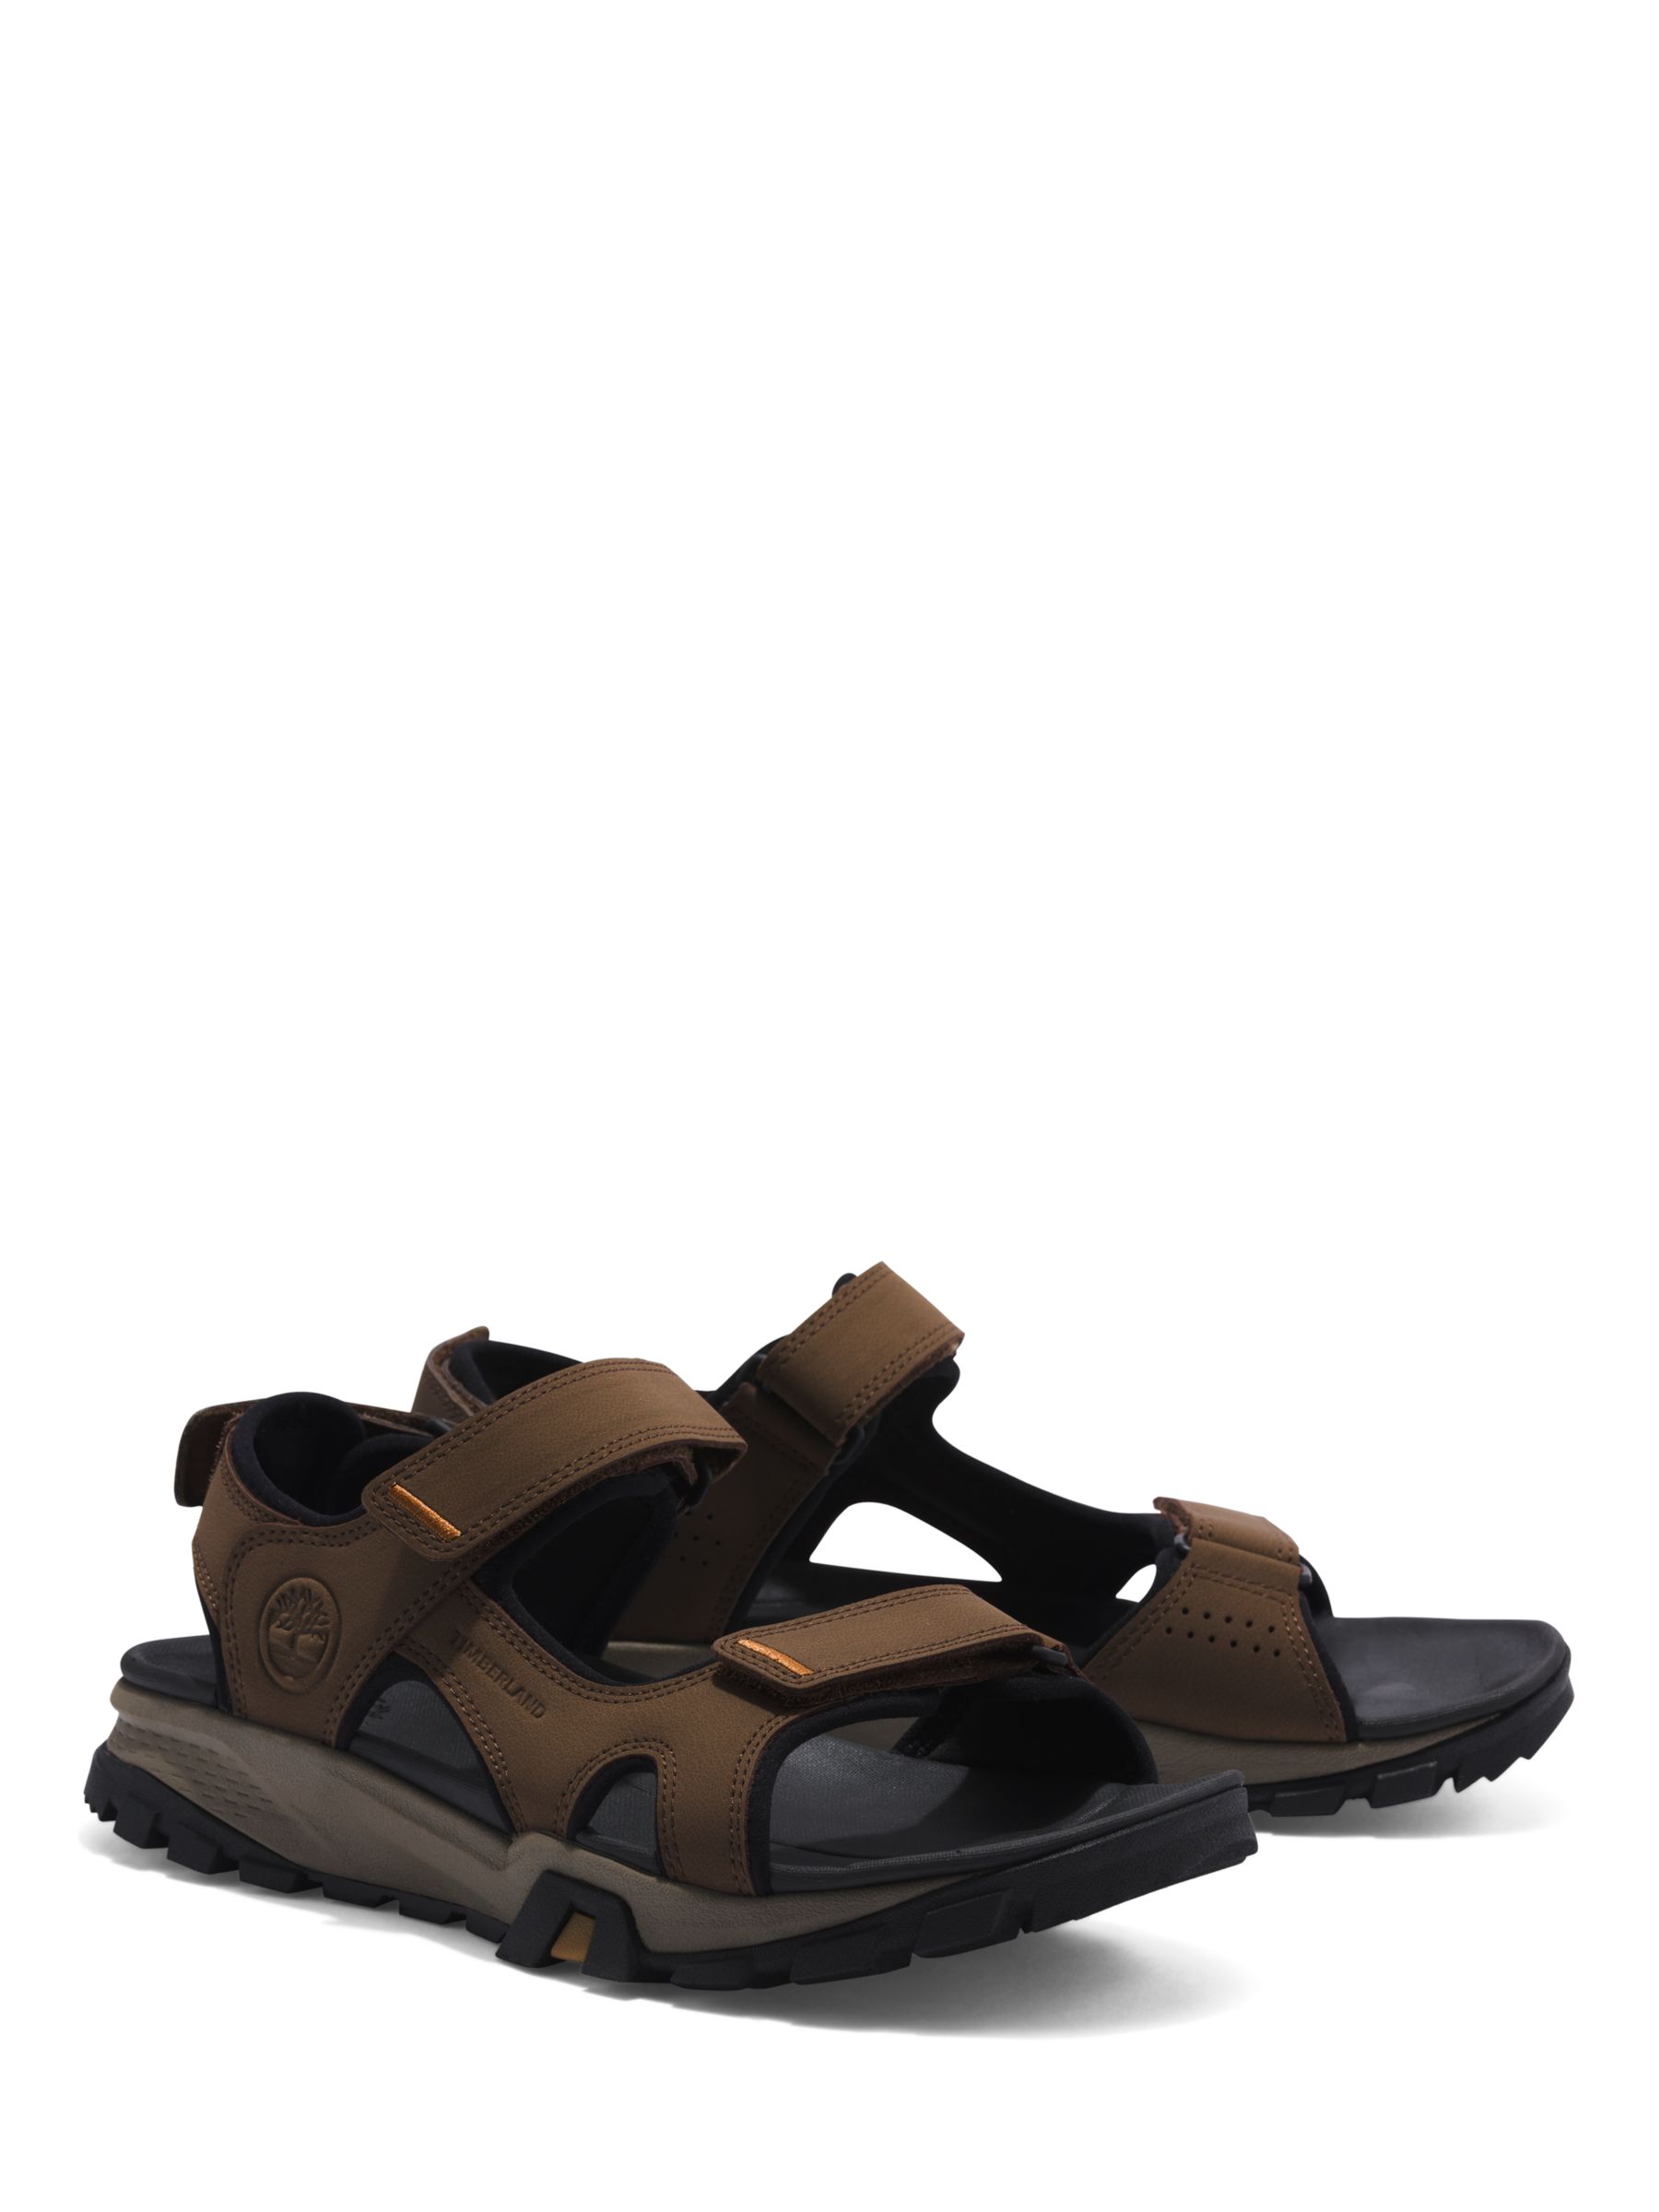 Timberland Lincoln Peak Leather Sandals, Brown, 9.5